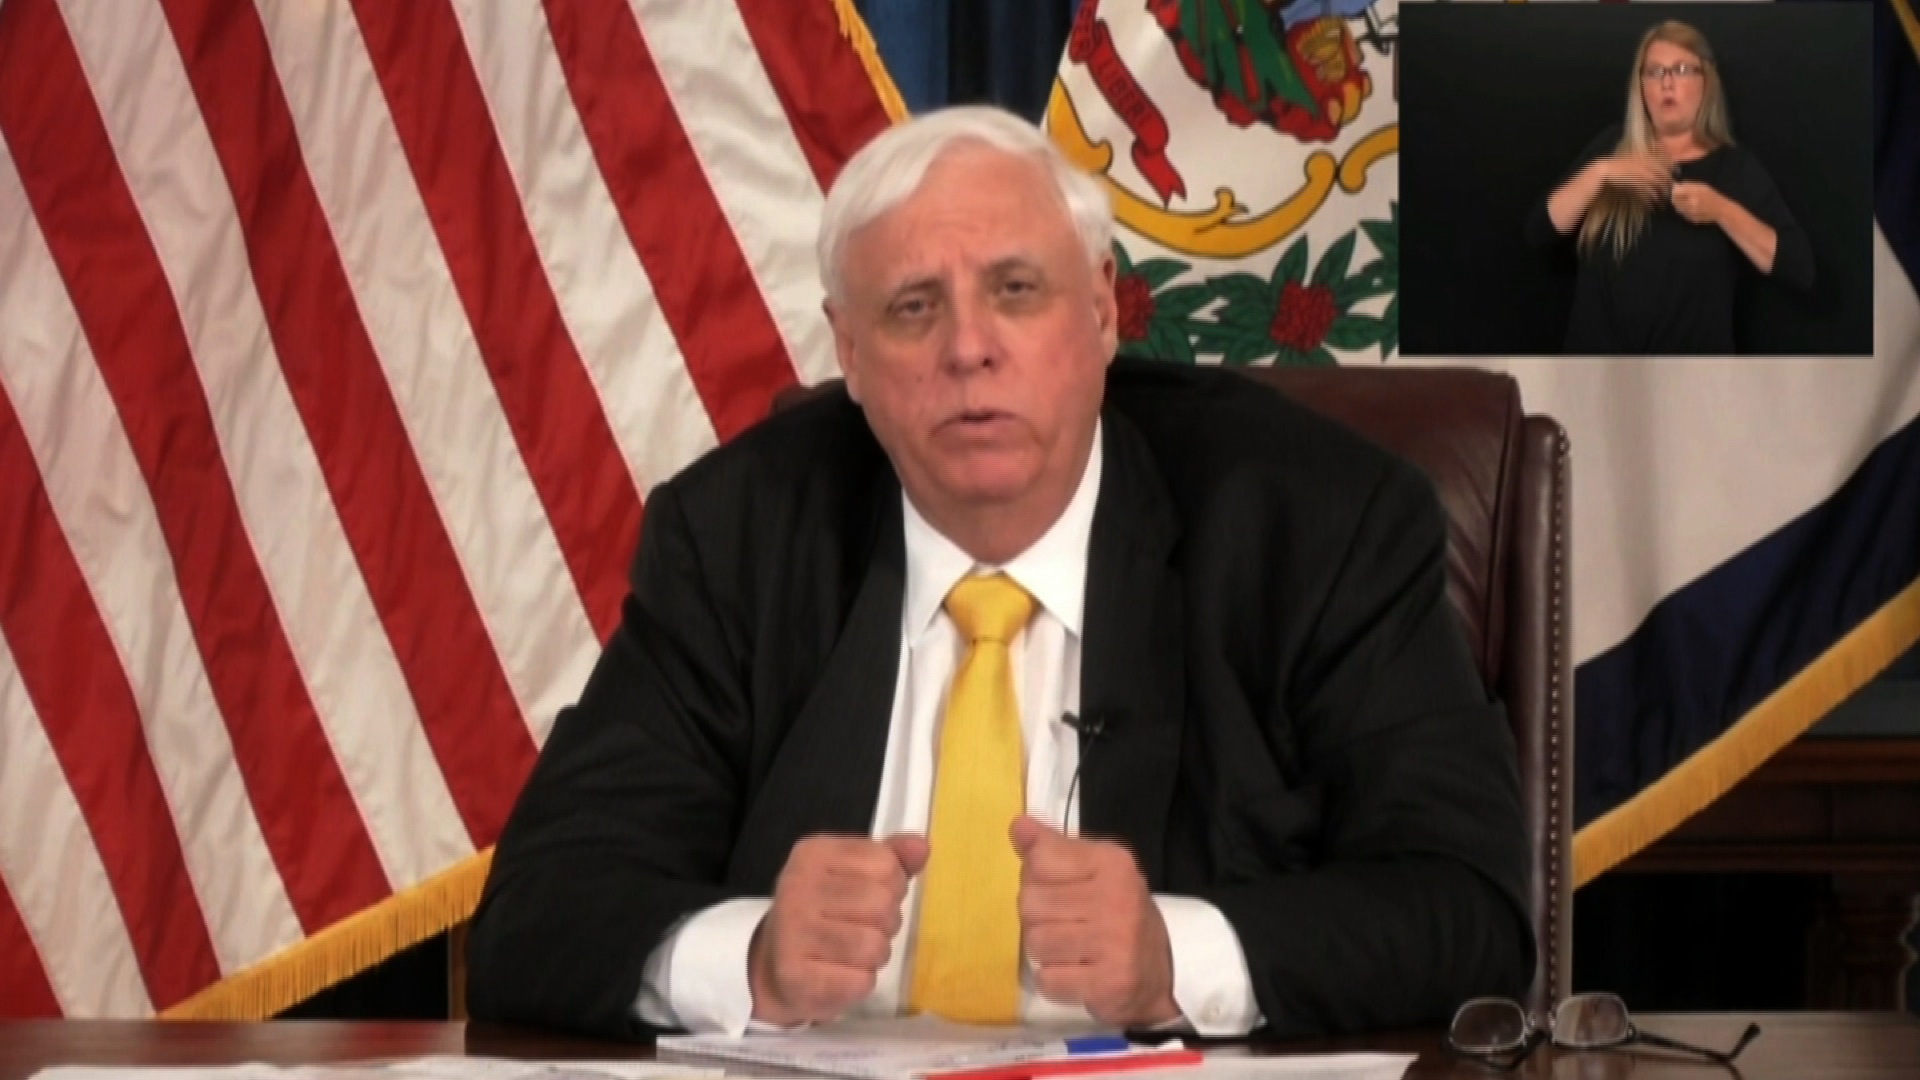 West Virginia Gov. Jim Justice speaks during a press conference in Charleston, West Virginia, on May 21.